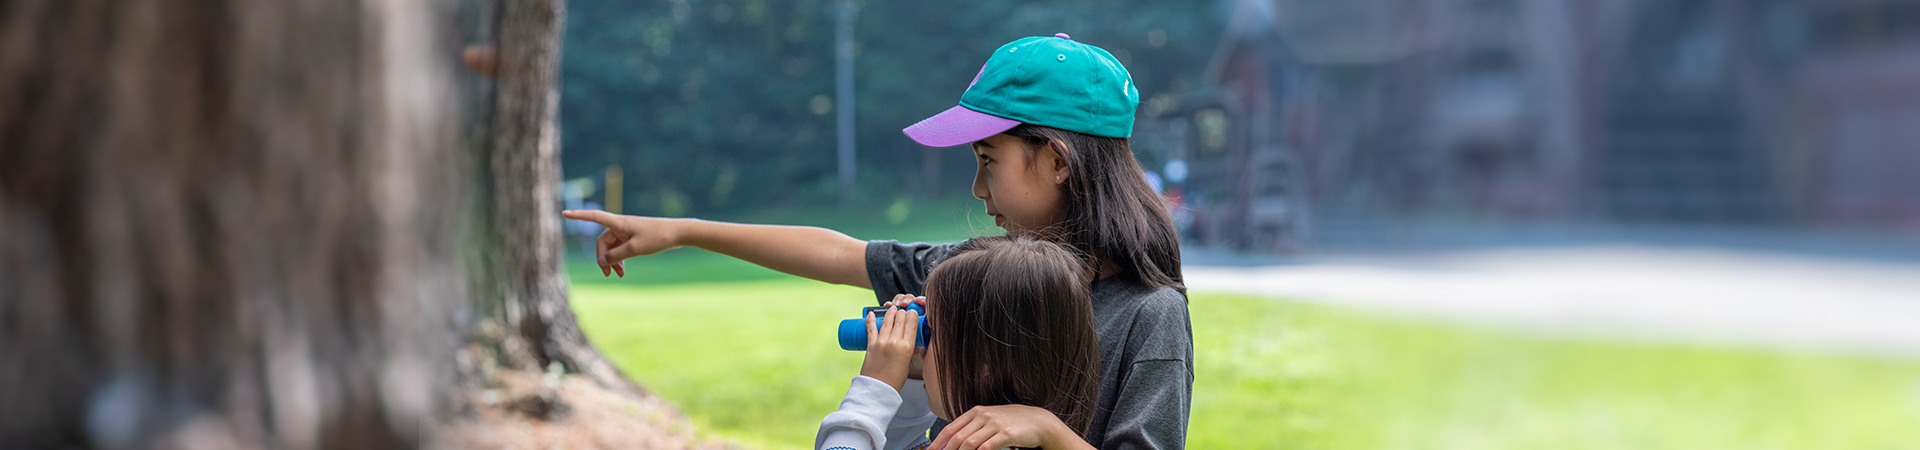  two young girls exploring the outdoors; the older girl is pointing while the younger girl is using binoculars 